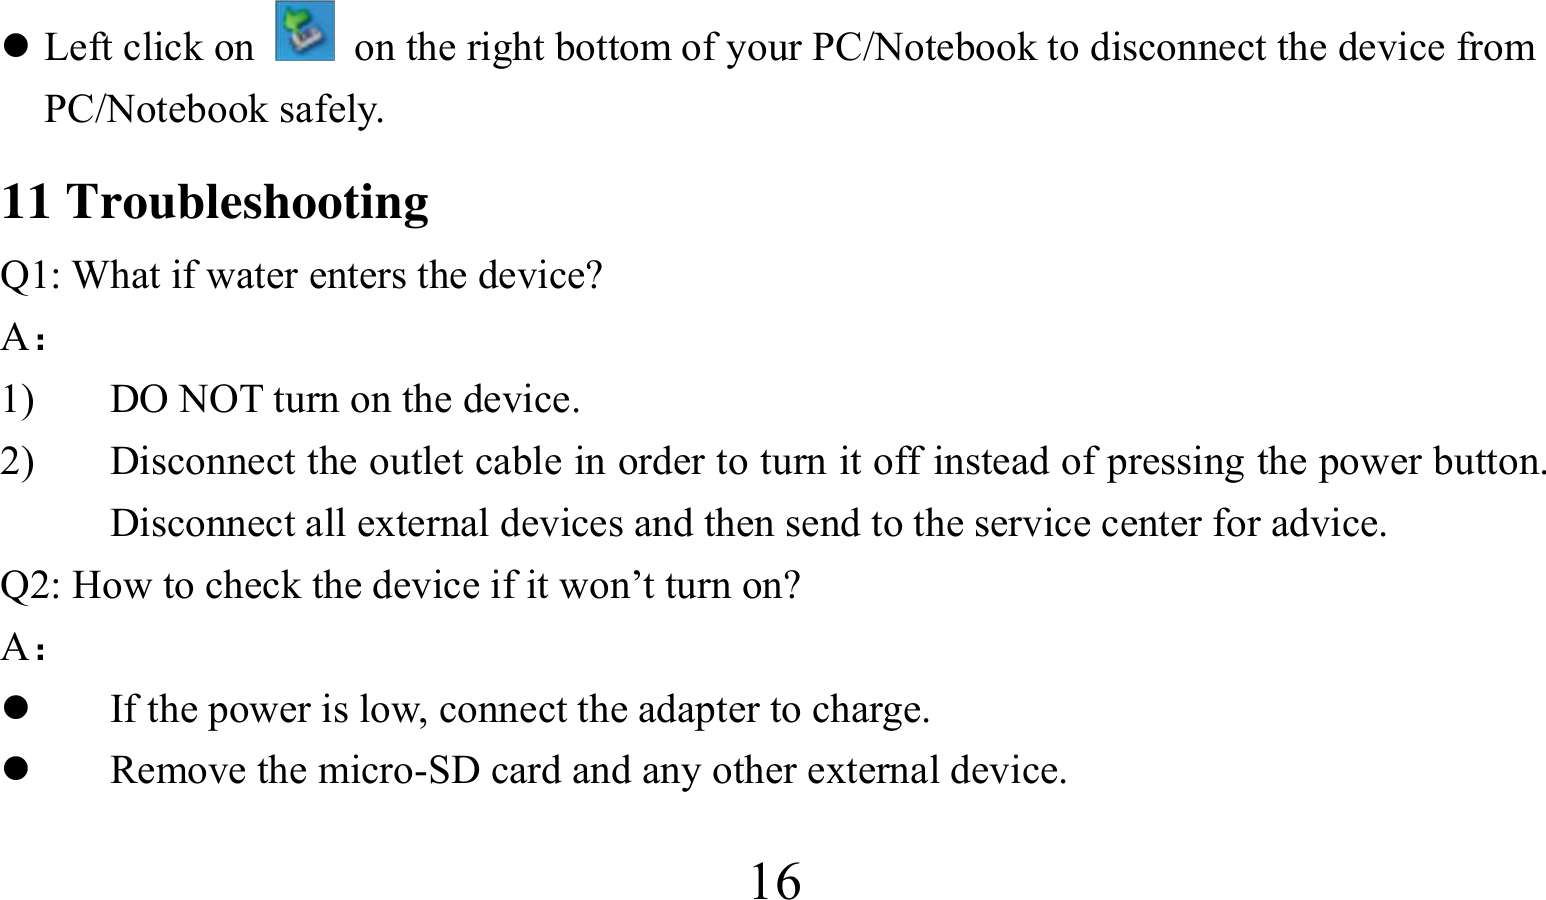  16 Left click on    on the right bottom of your PC/Notebook to disconnect the device from PC/Notebook safely. 11 Troubleshooting Q1: What if water enters the device? A： 1) DO NOT turn on the device. 2) Disconnect the outlet cable in order to turn it off instead of pressing the power button. Disconnect all external devices and then send to the service center for advice. Q2: How to check the device if it won’t turn on? A：  If the power is low, connect the adapter to charge.  Remove the micro-SD card and any other external device. 